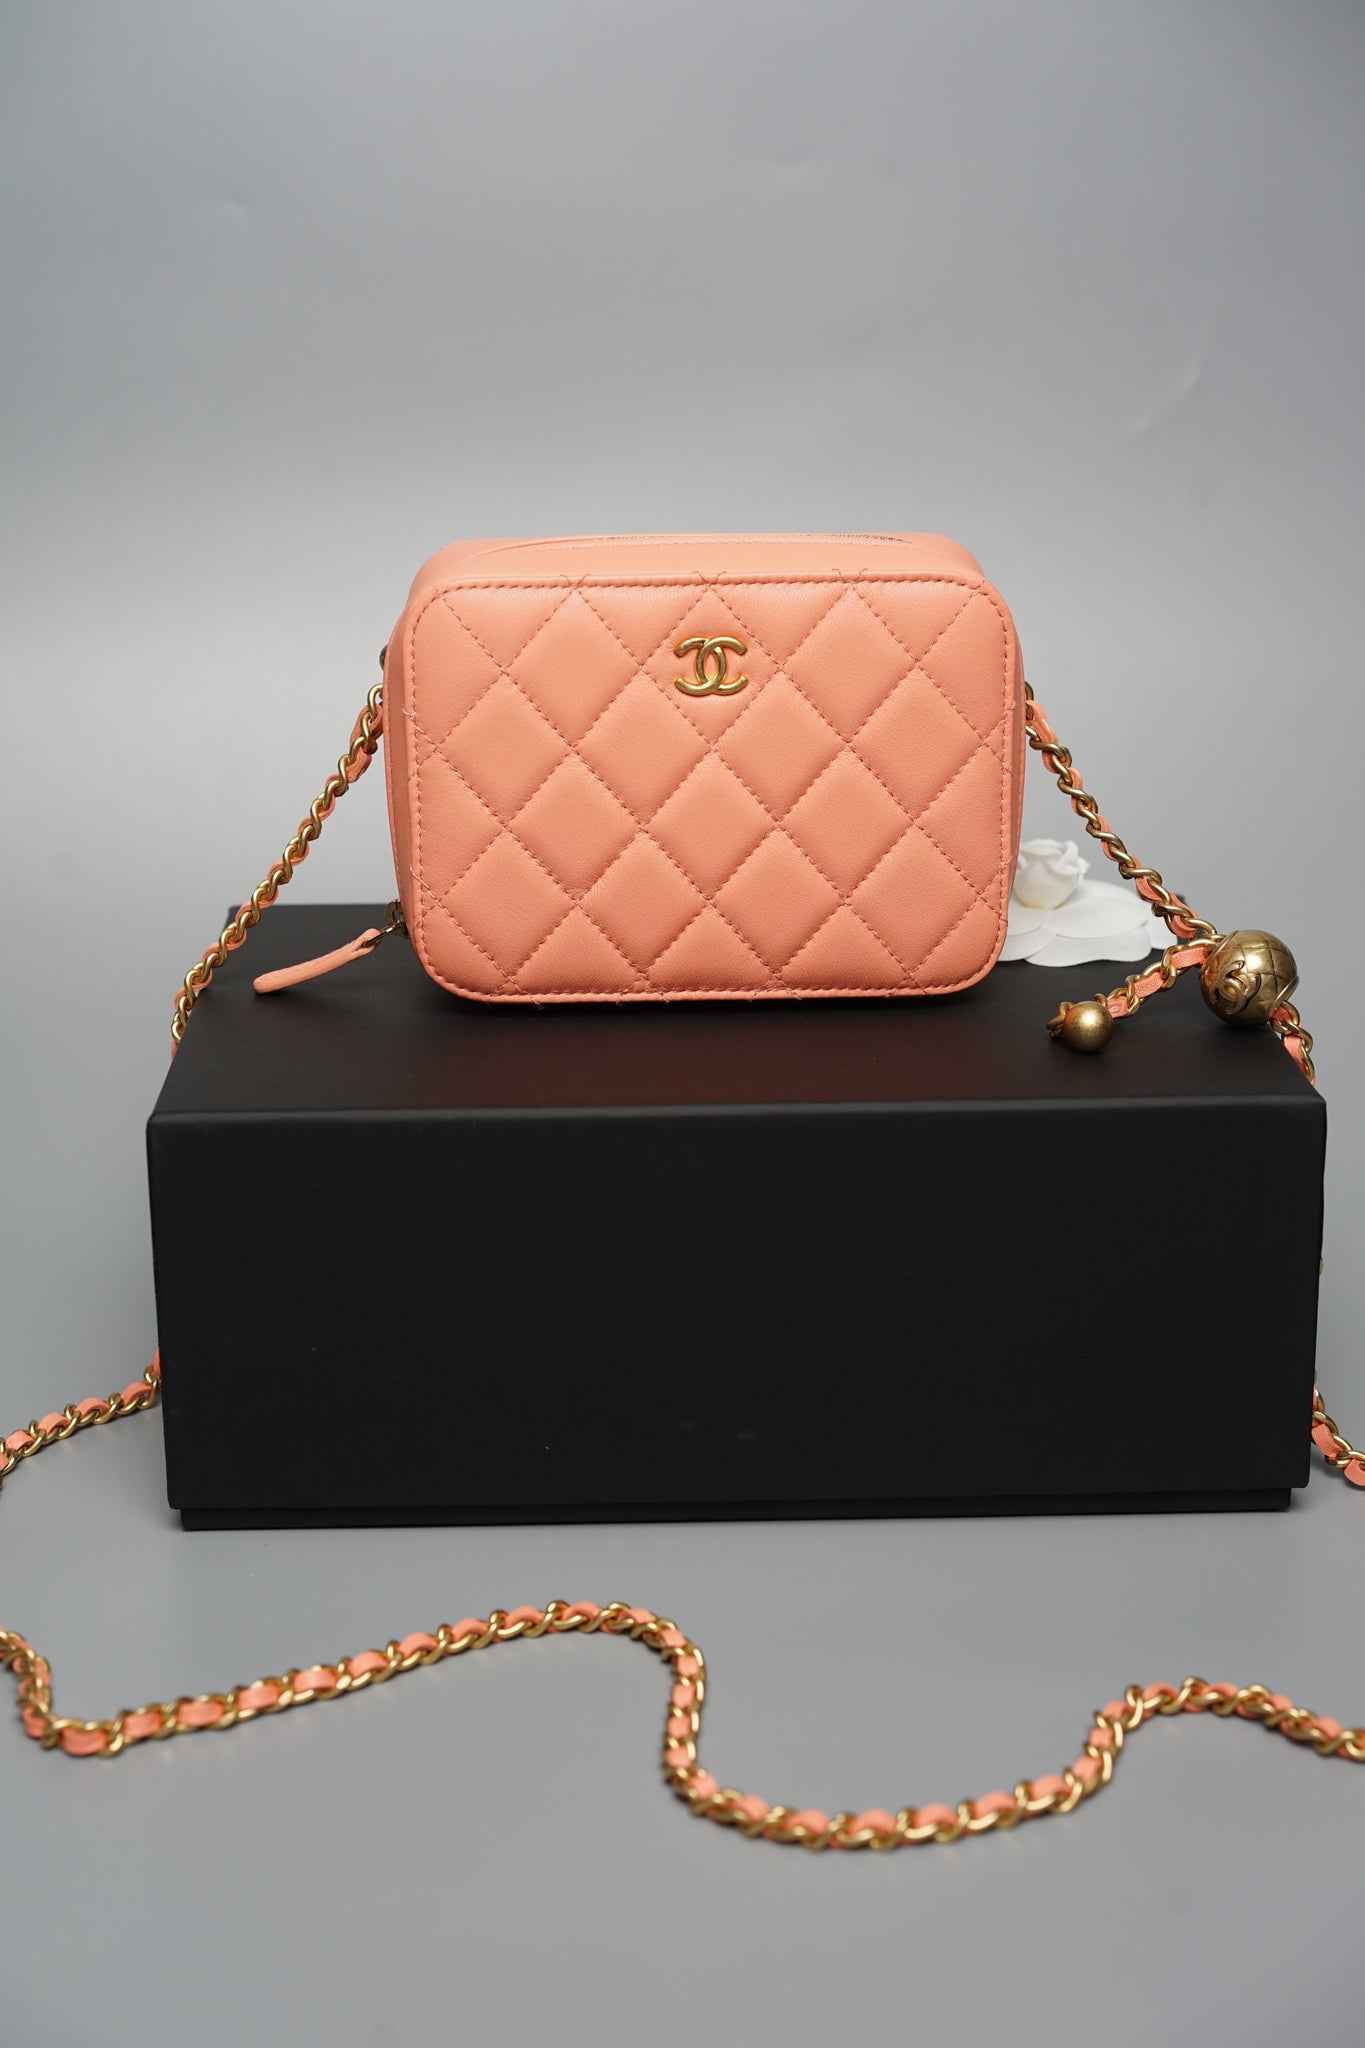 Chanel Mini Pearl Crush Quilted Camera Case in Beige Pink Bghw